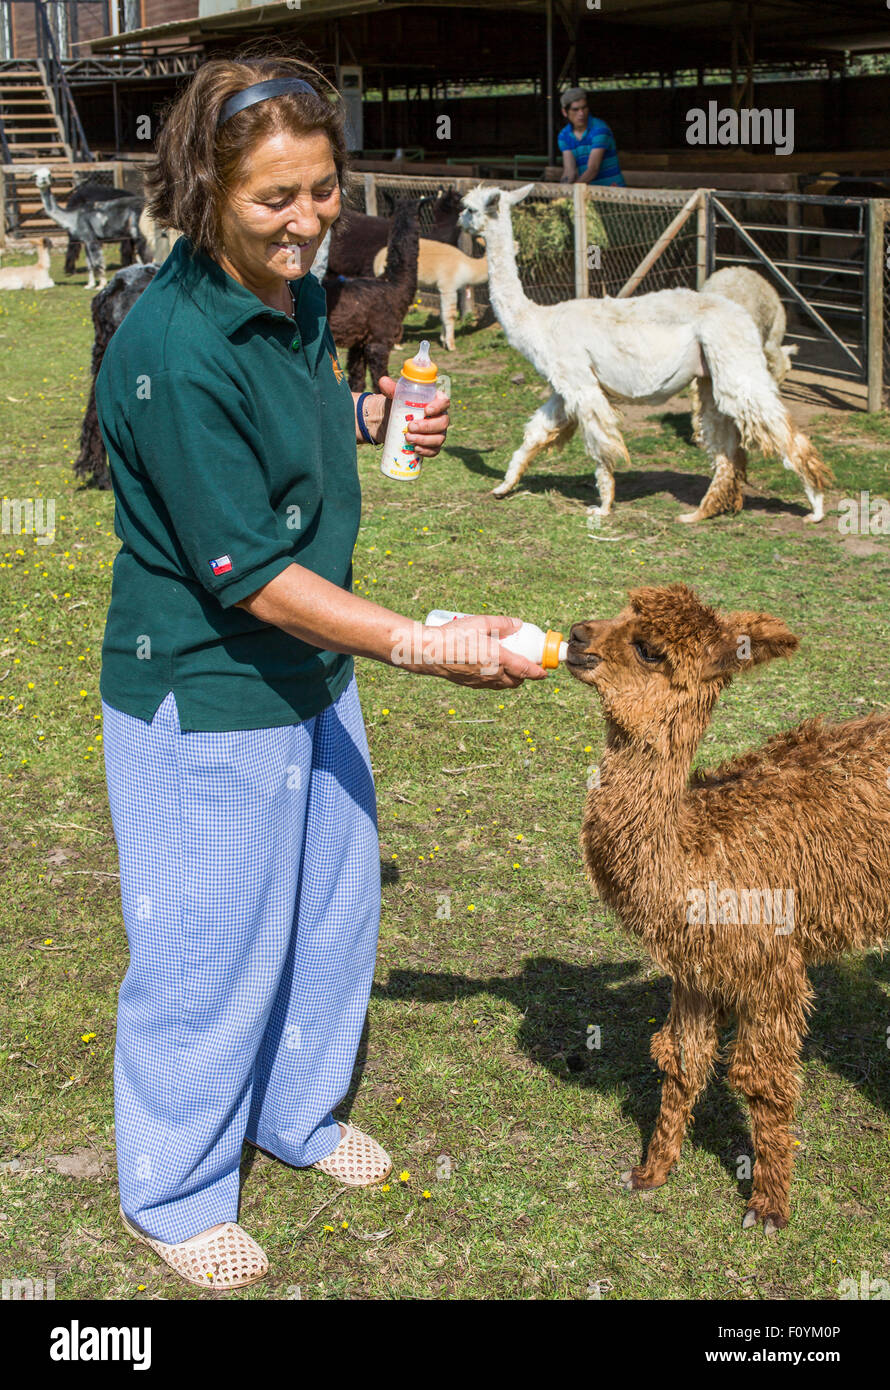 Woman feeds baby Alpaca with bottle, Llay Llay, Central Chile Stock Photo